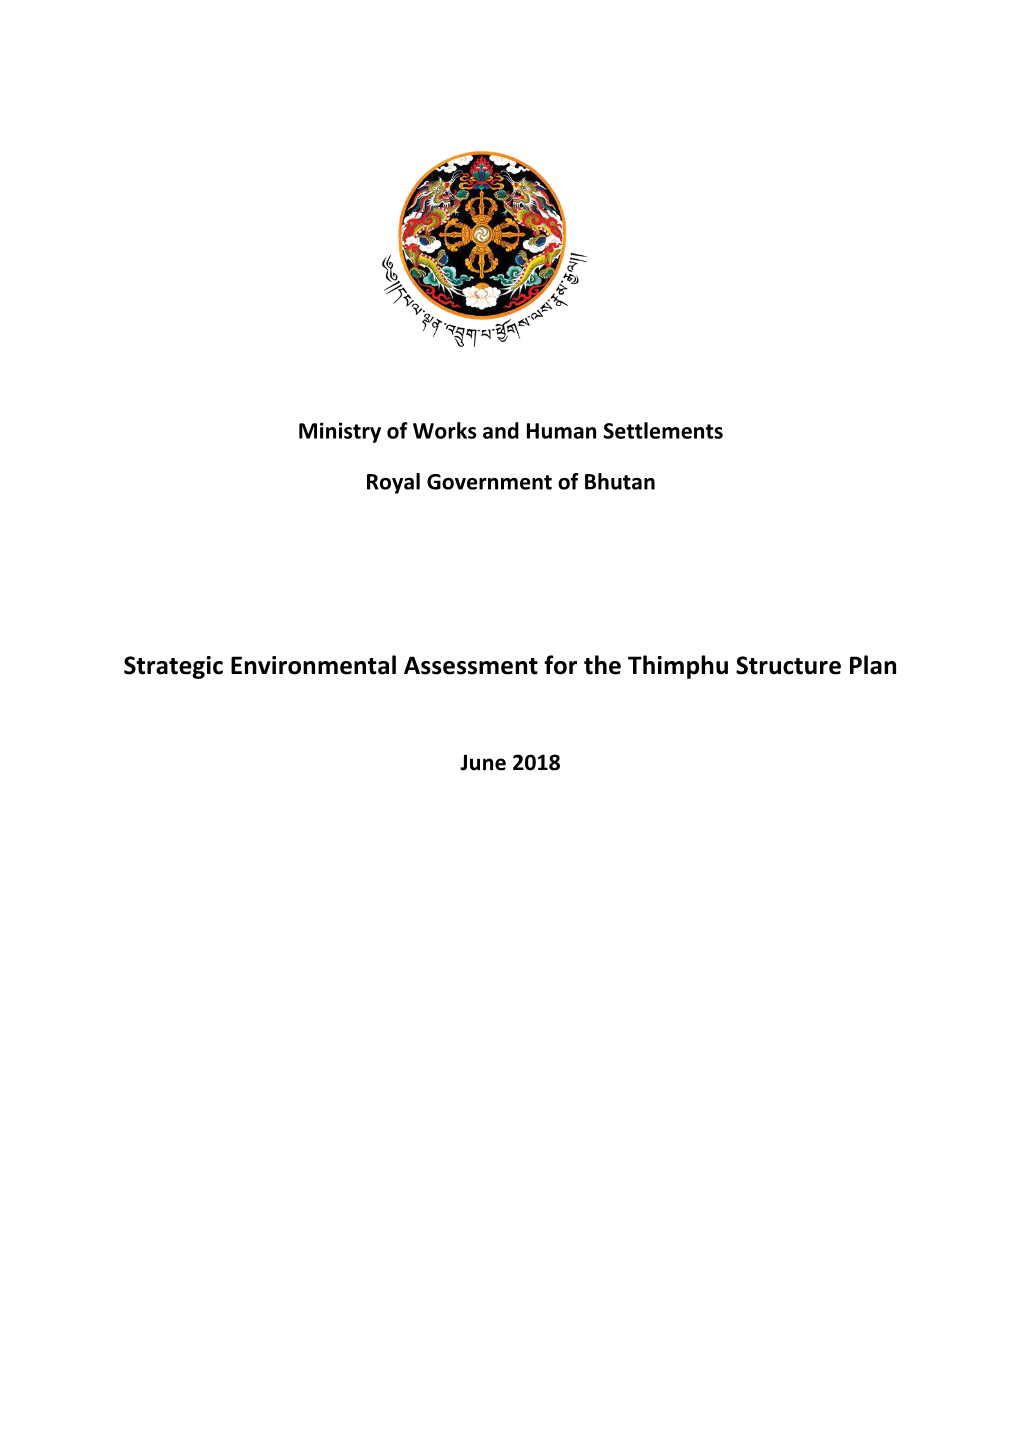 Strategic Environmental Assessment for the Thimphu Structure Plan